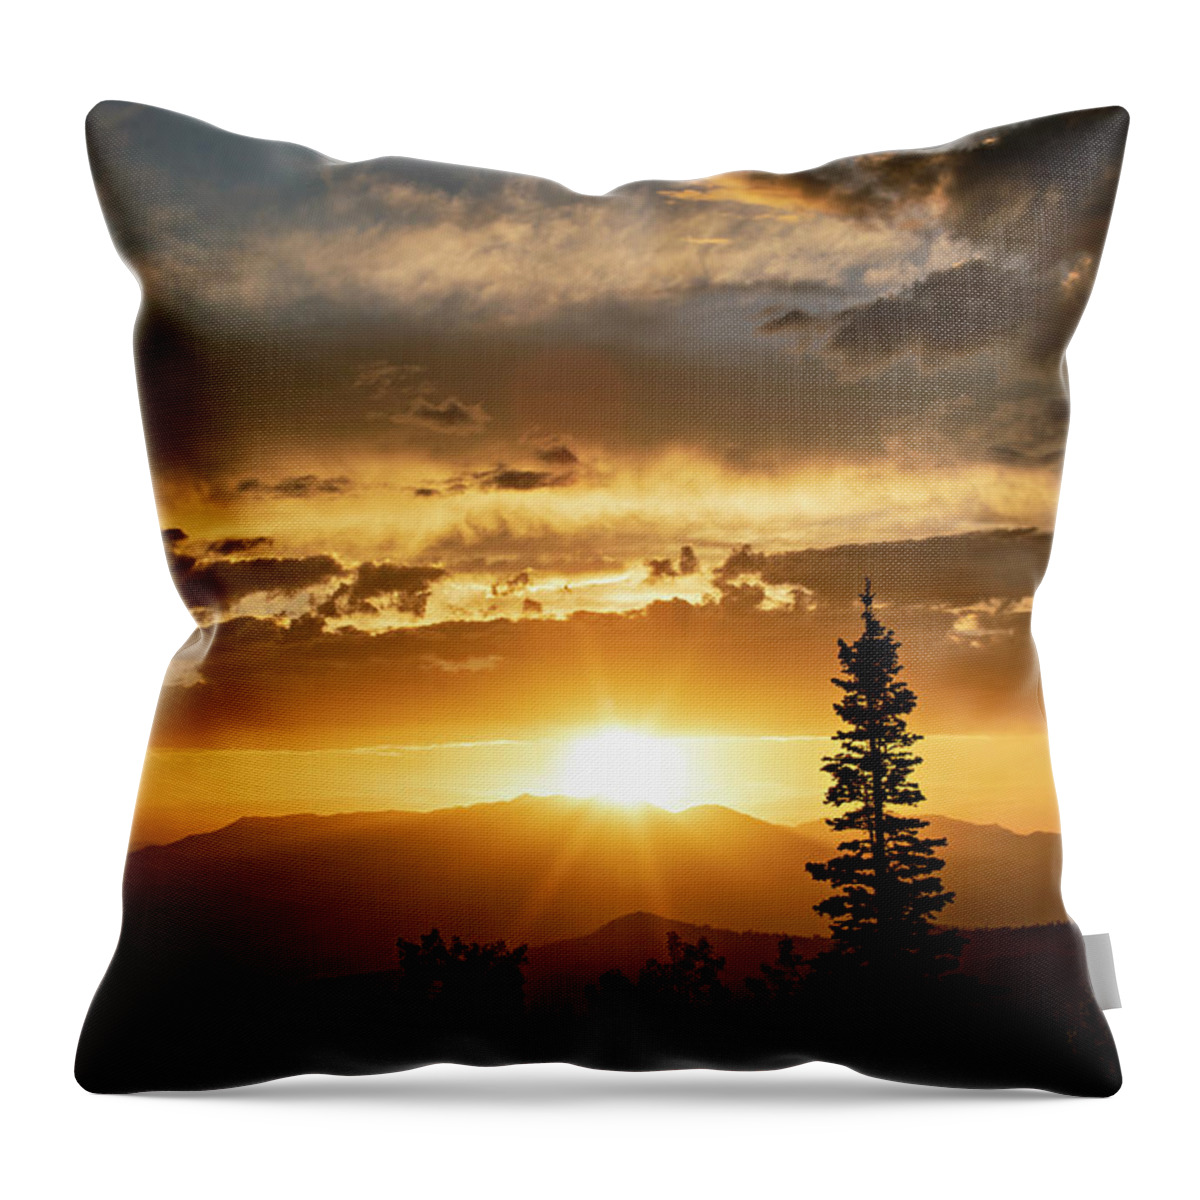 Sunset Throw Pillow featuring the photograph Single Tree Sunset by Wesley Aston